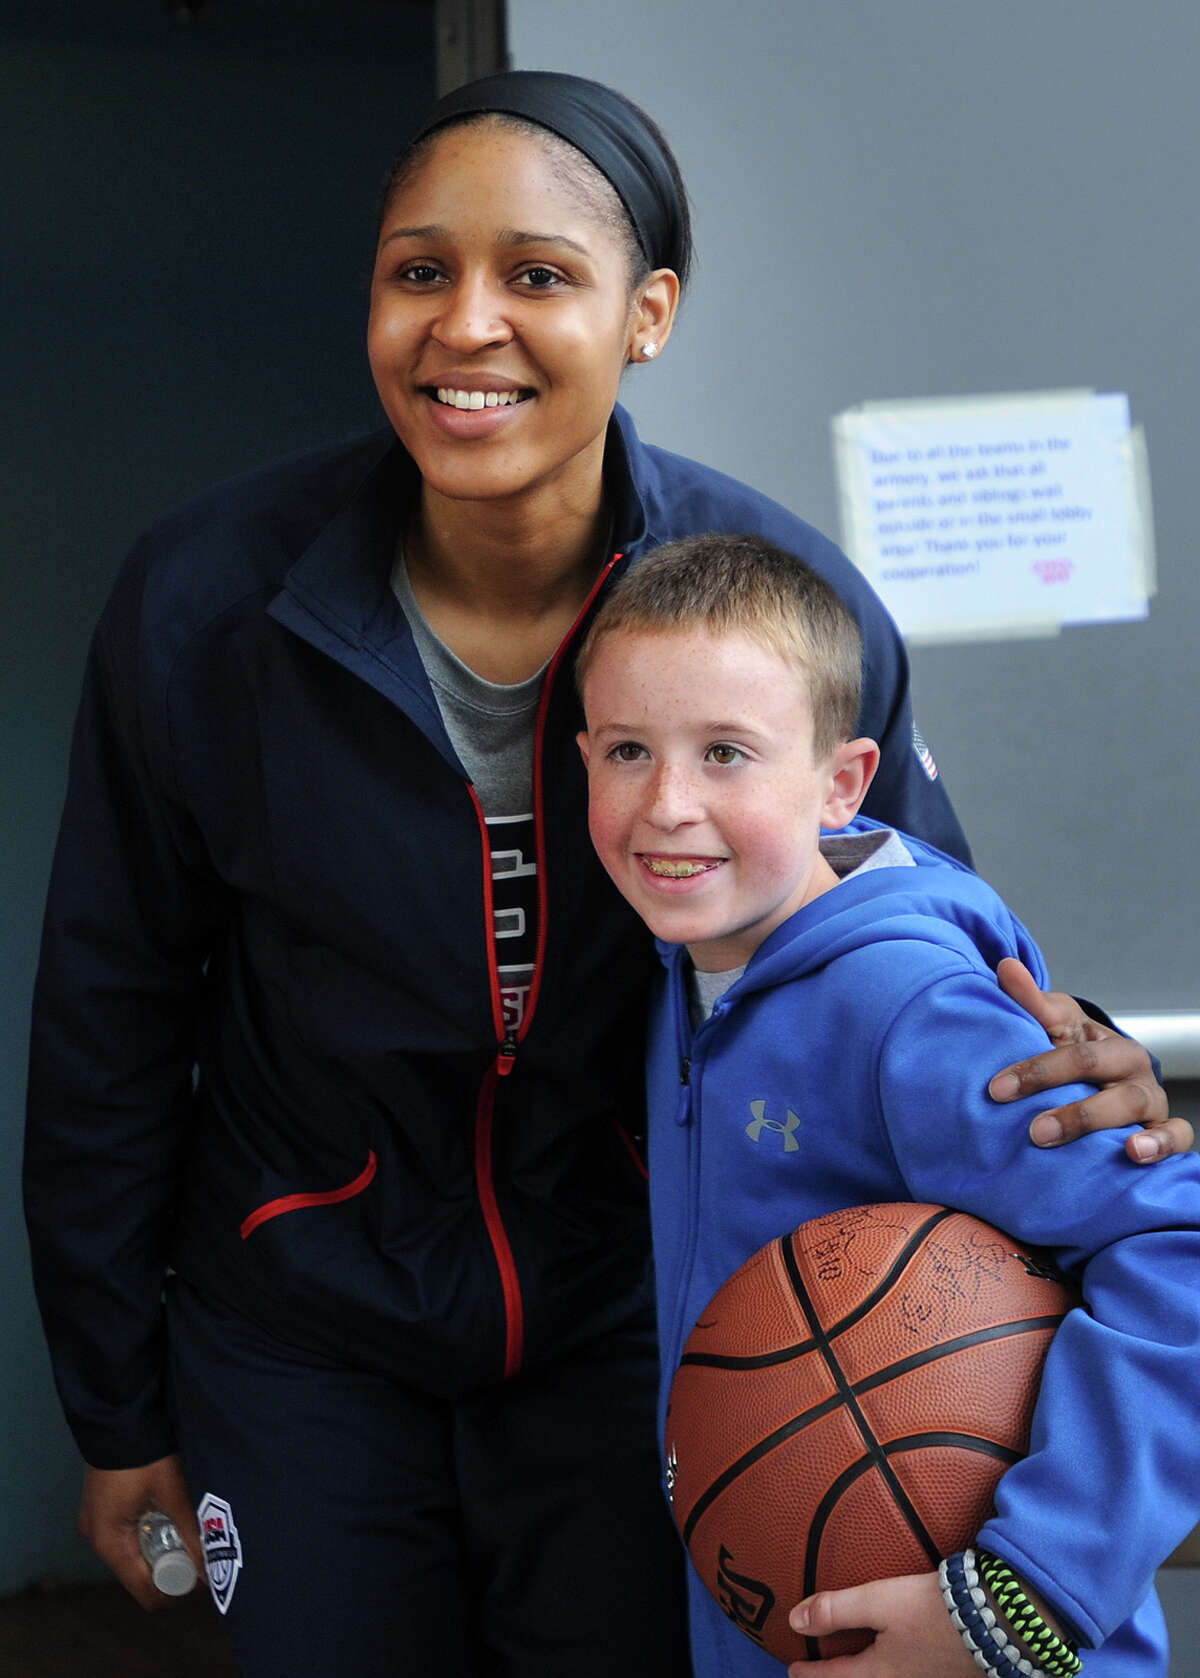 Former UCONN women's basketball and current WNBA star Maya Moore poses for a photo with fan Michael Eheman, Jr., 11, of Ansonia, outside the National Guard Armory in Ansonia, Conn on Sunday, September 14, 2014. A variety of former UCONN players were on hand for the filming of an ESPN documentary on the sport of women's basketball.